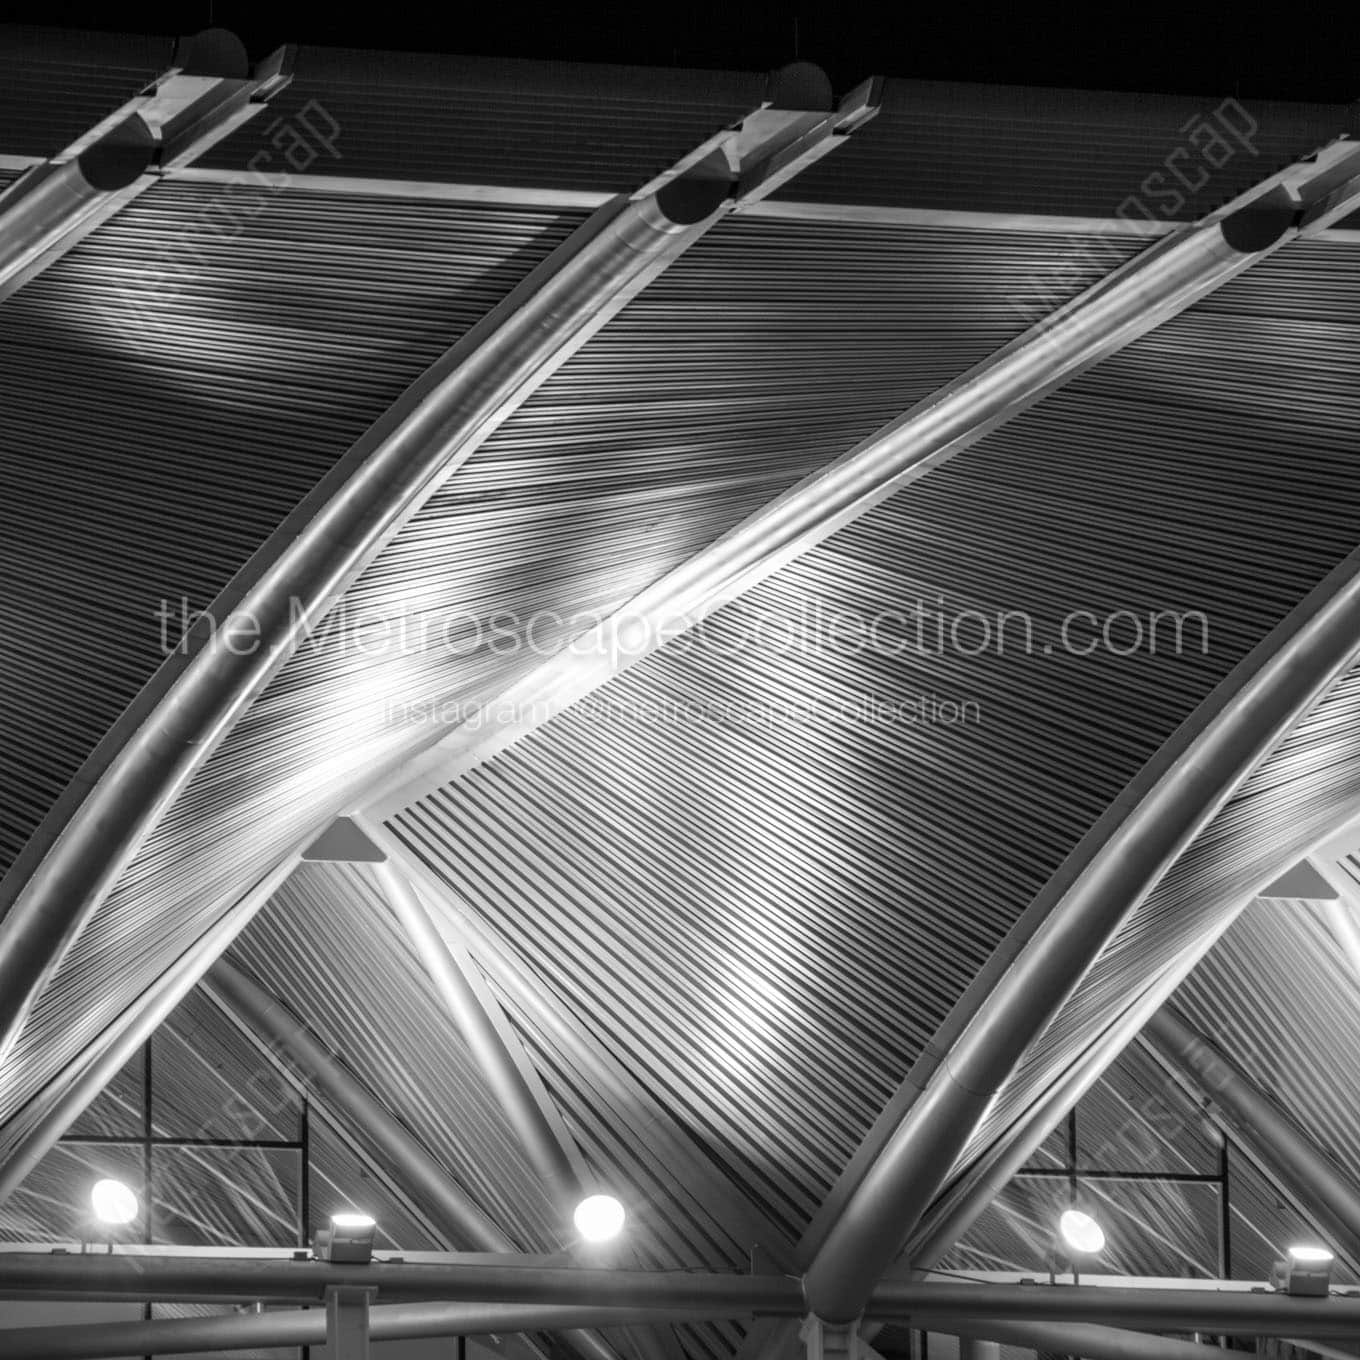 phillips performing arts center canopy Black & White Office Art